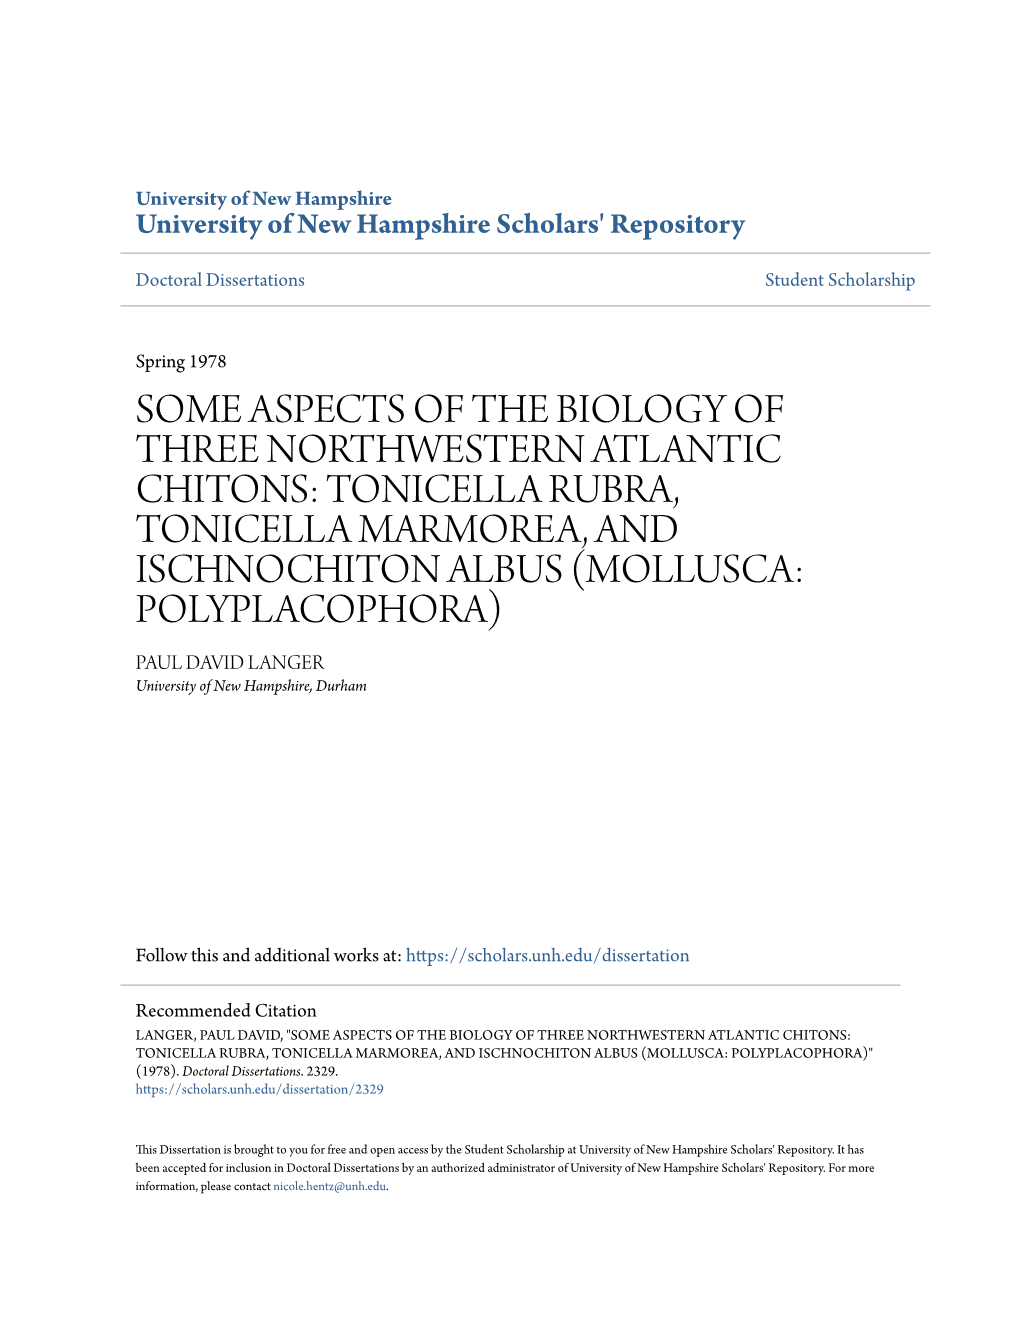 Some Aspects of the Biology of Three Northwestern Atlantic Chitons